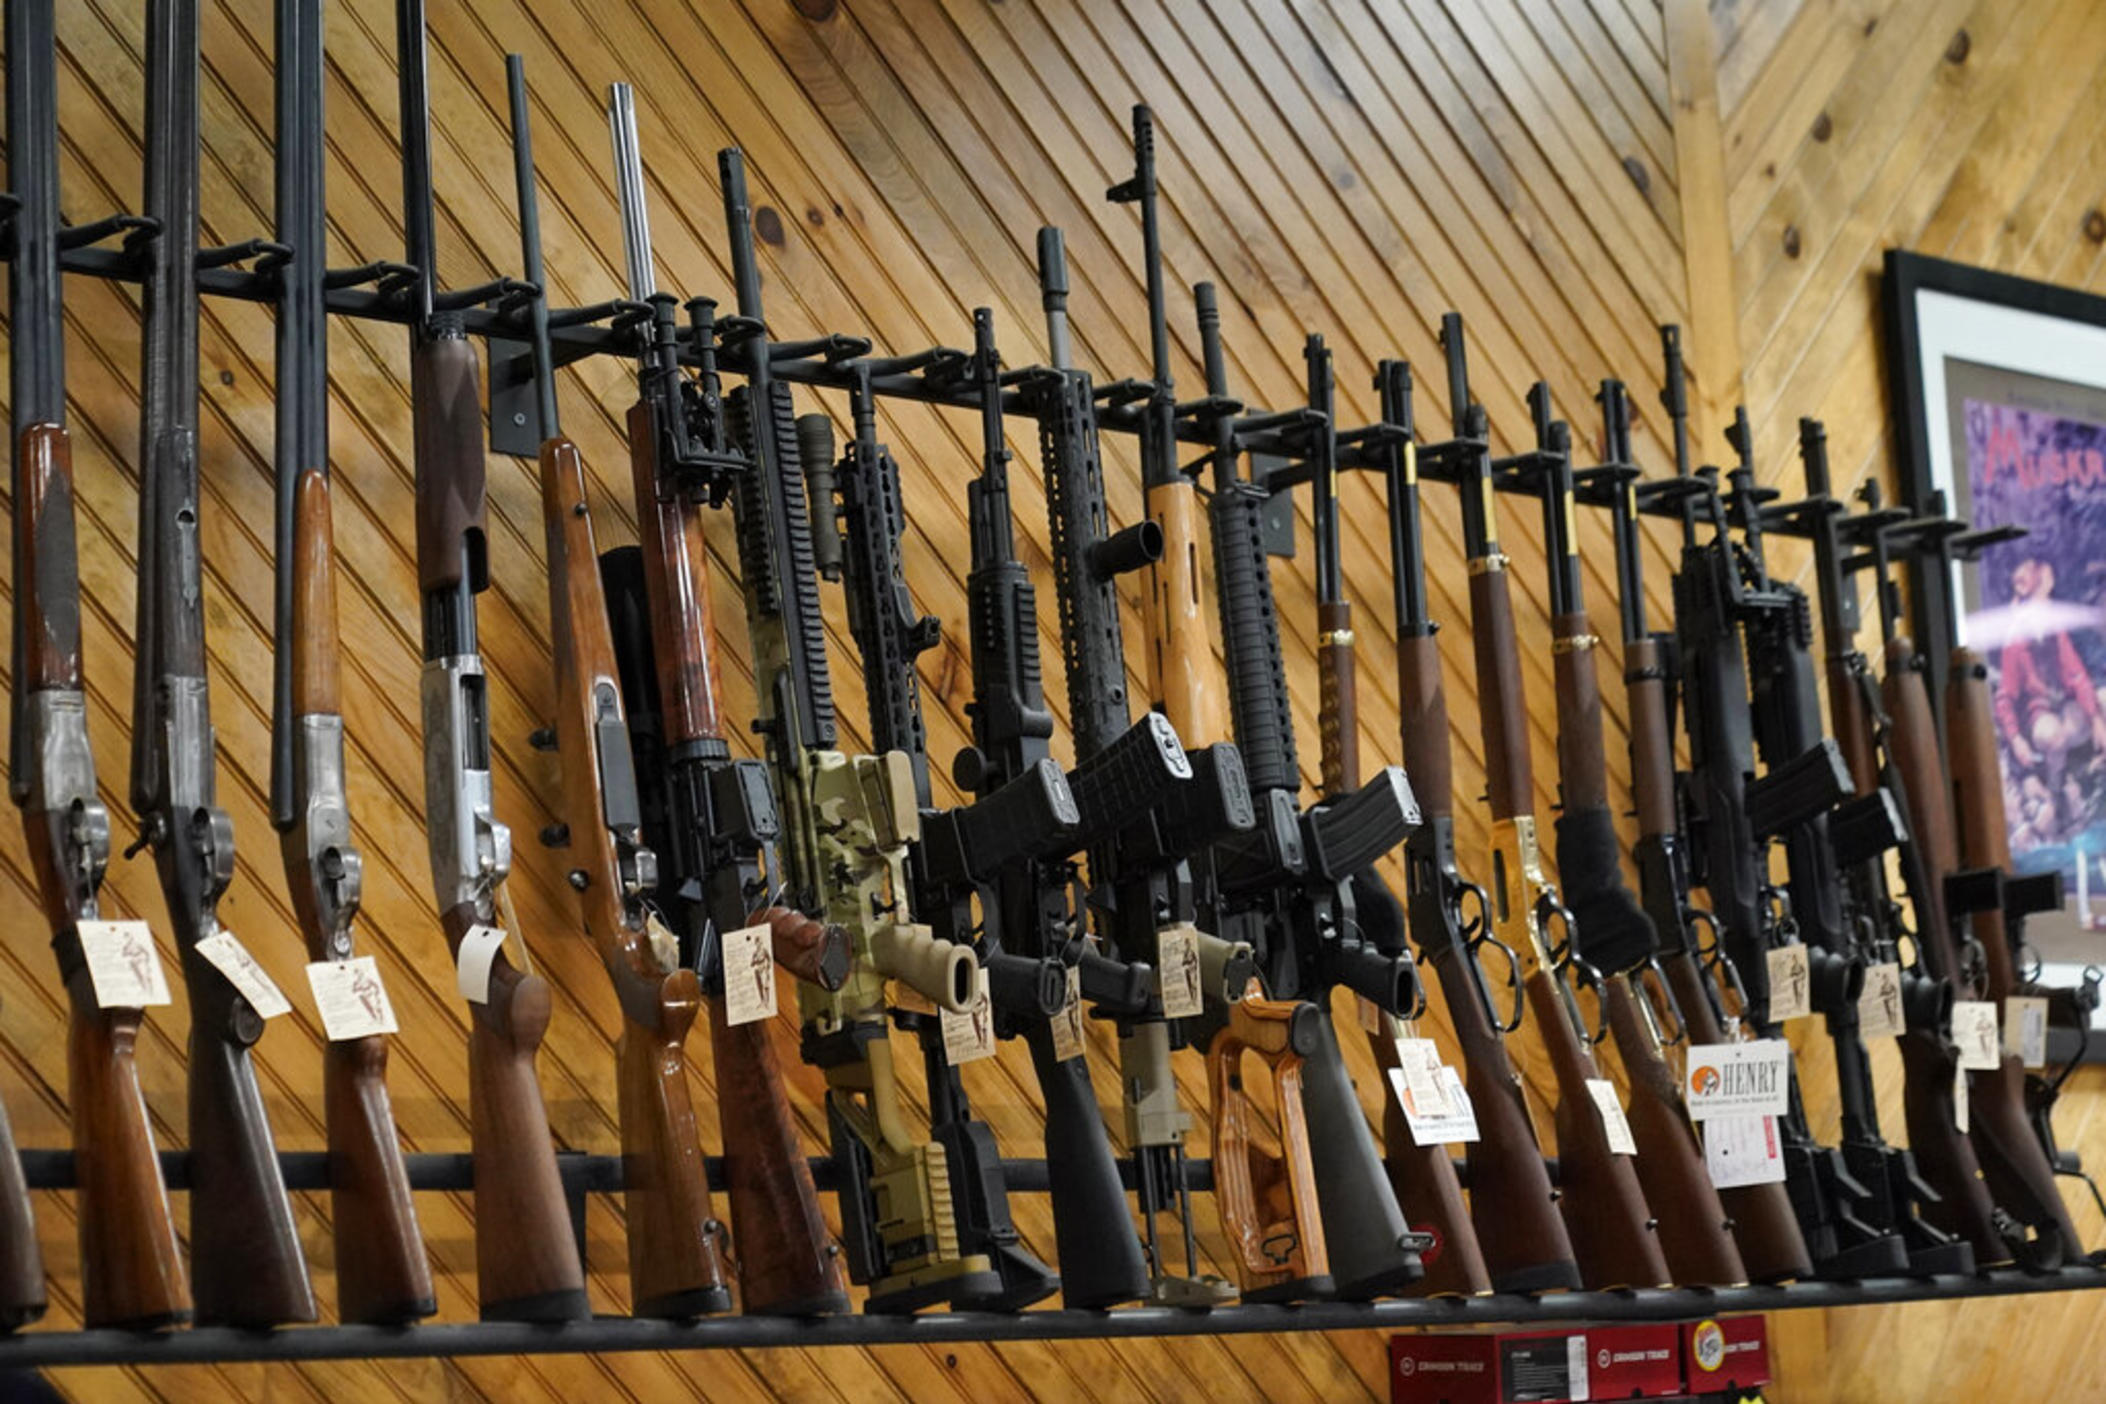 Various guns are displayed at a store on July 18, 2022, in Auburn, Maine. Most U.S. adults think gun violence is increasing nationwide and want to see gun laws made stricter. That's according to a new poll that finds broad public support for a variety of gun restrictions. The poll comes from the University of Chicago Harris School of Public Policy and The Associated Press-NORC Center for Public Affairs Research.